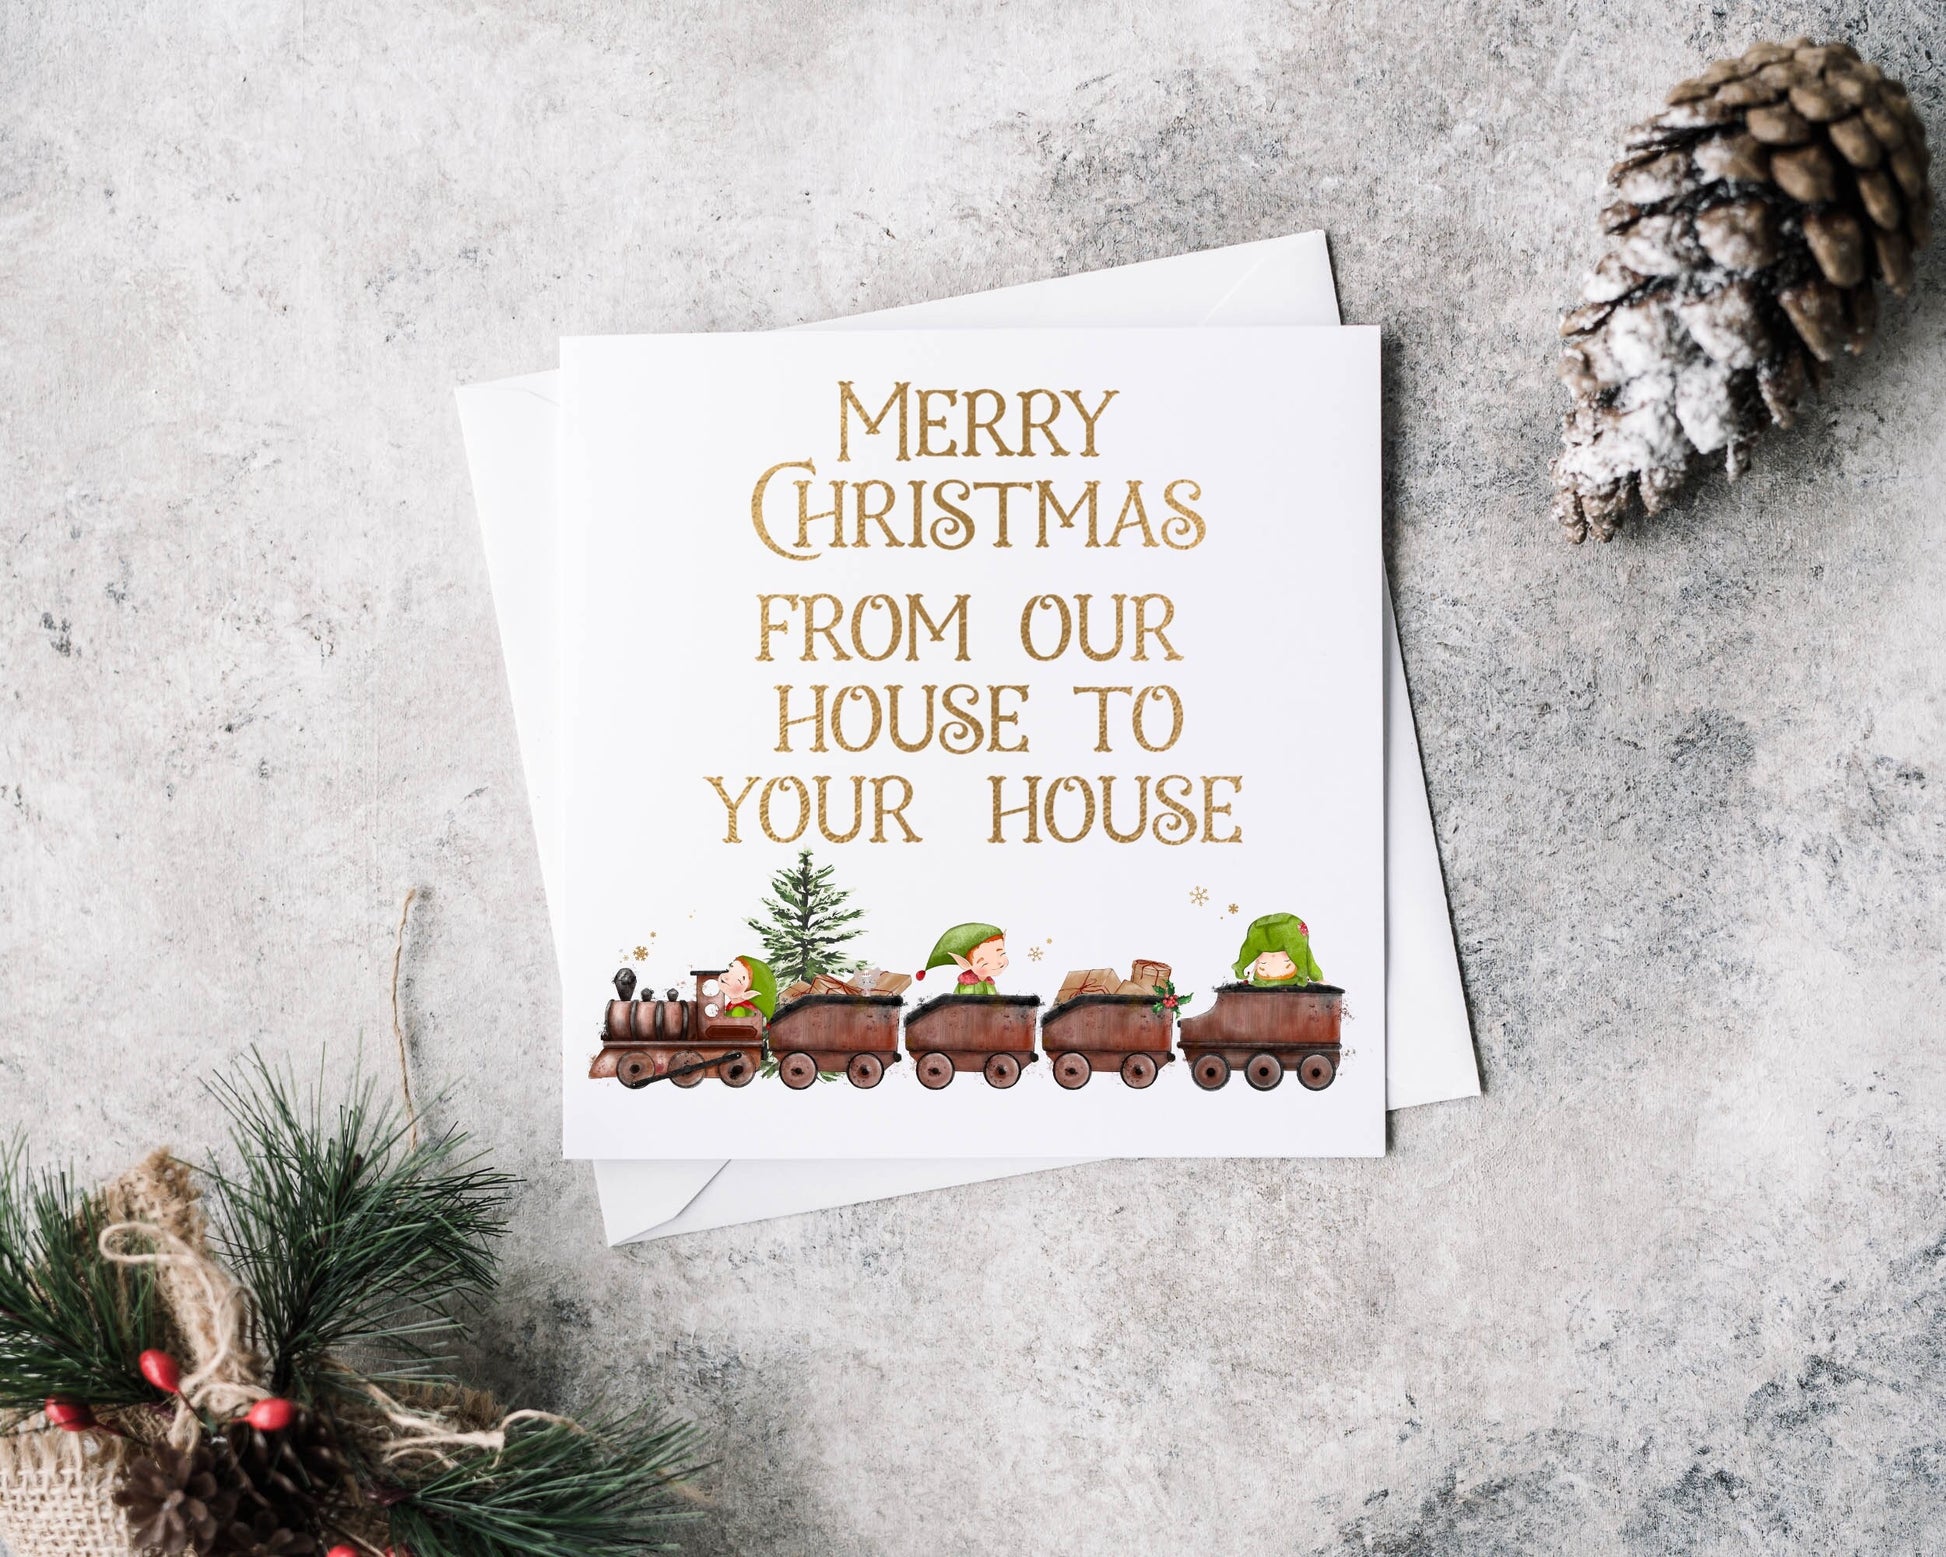 Christmas card with an elf train design and text reading 'Merry Christmas from our house to your house'